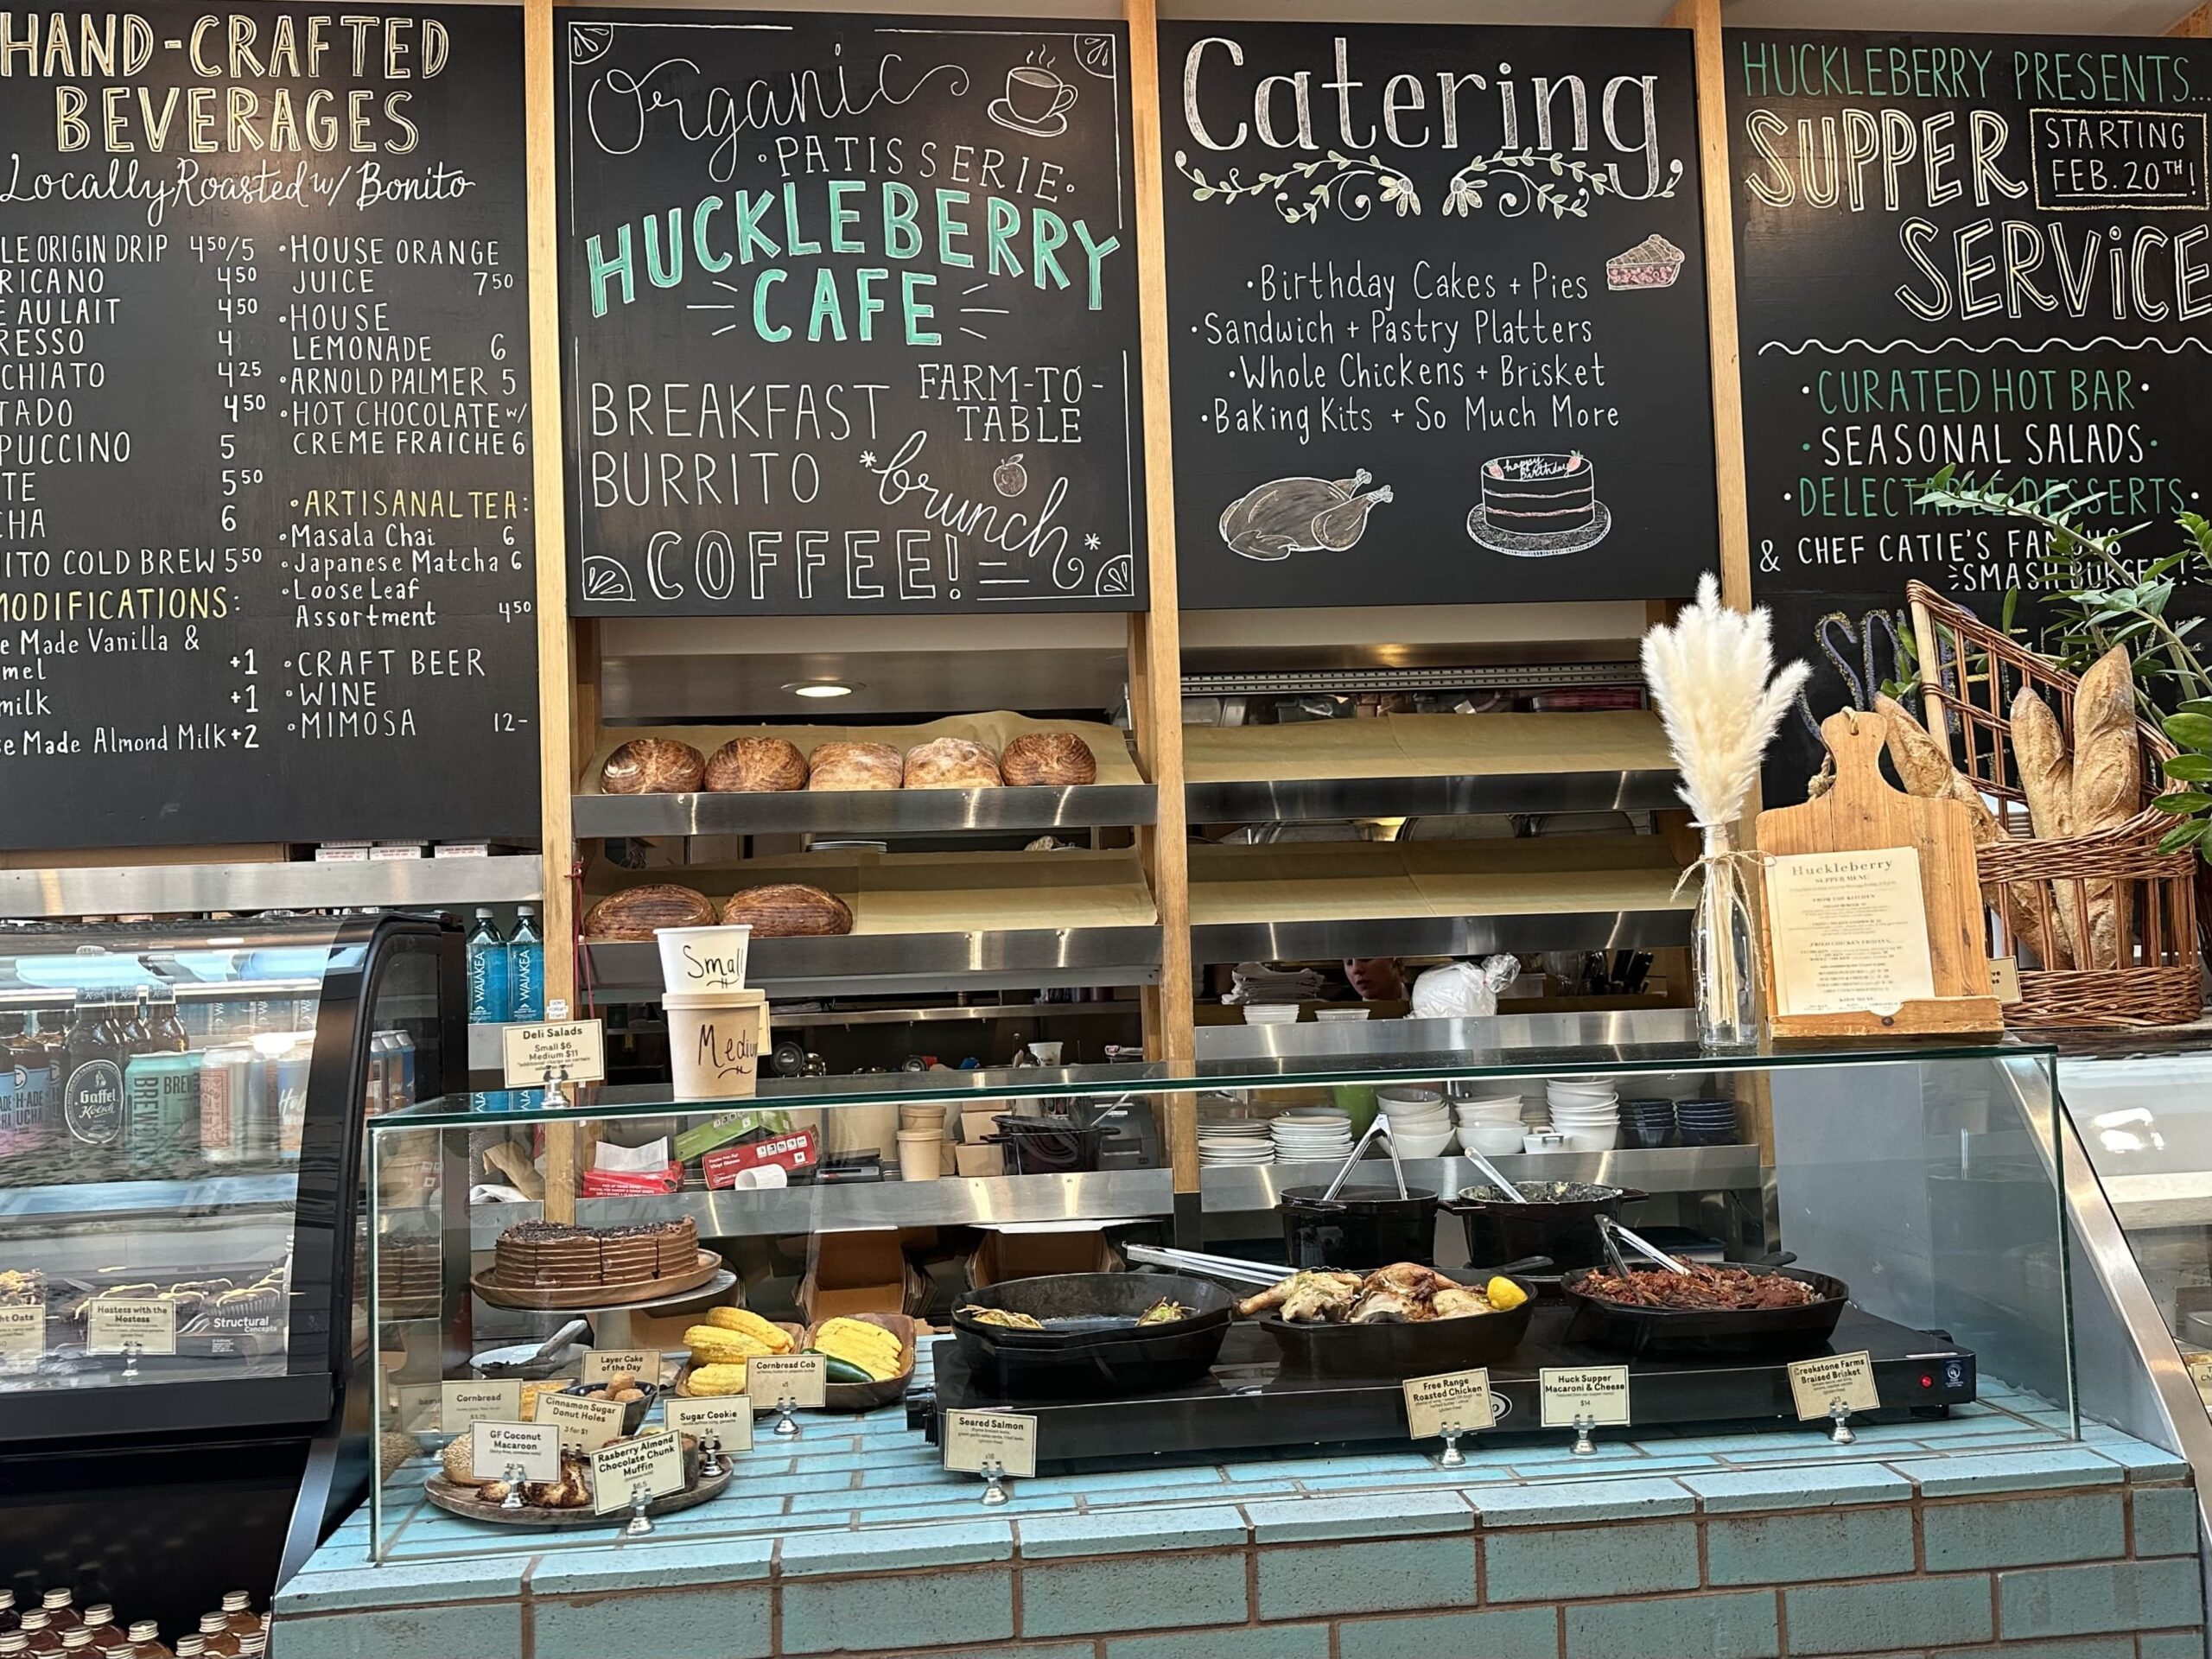 An image of the counter at Huckleberry with the signs and supper items in a case.